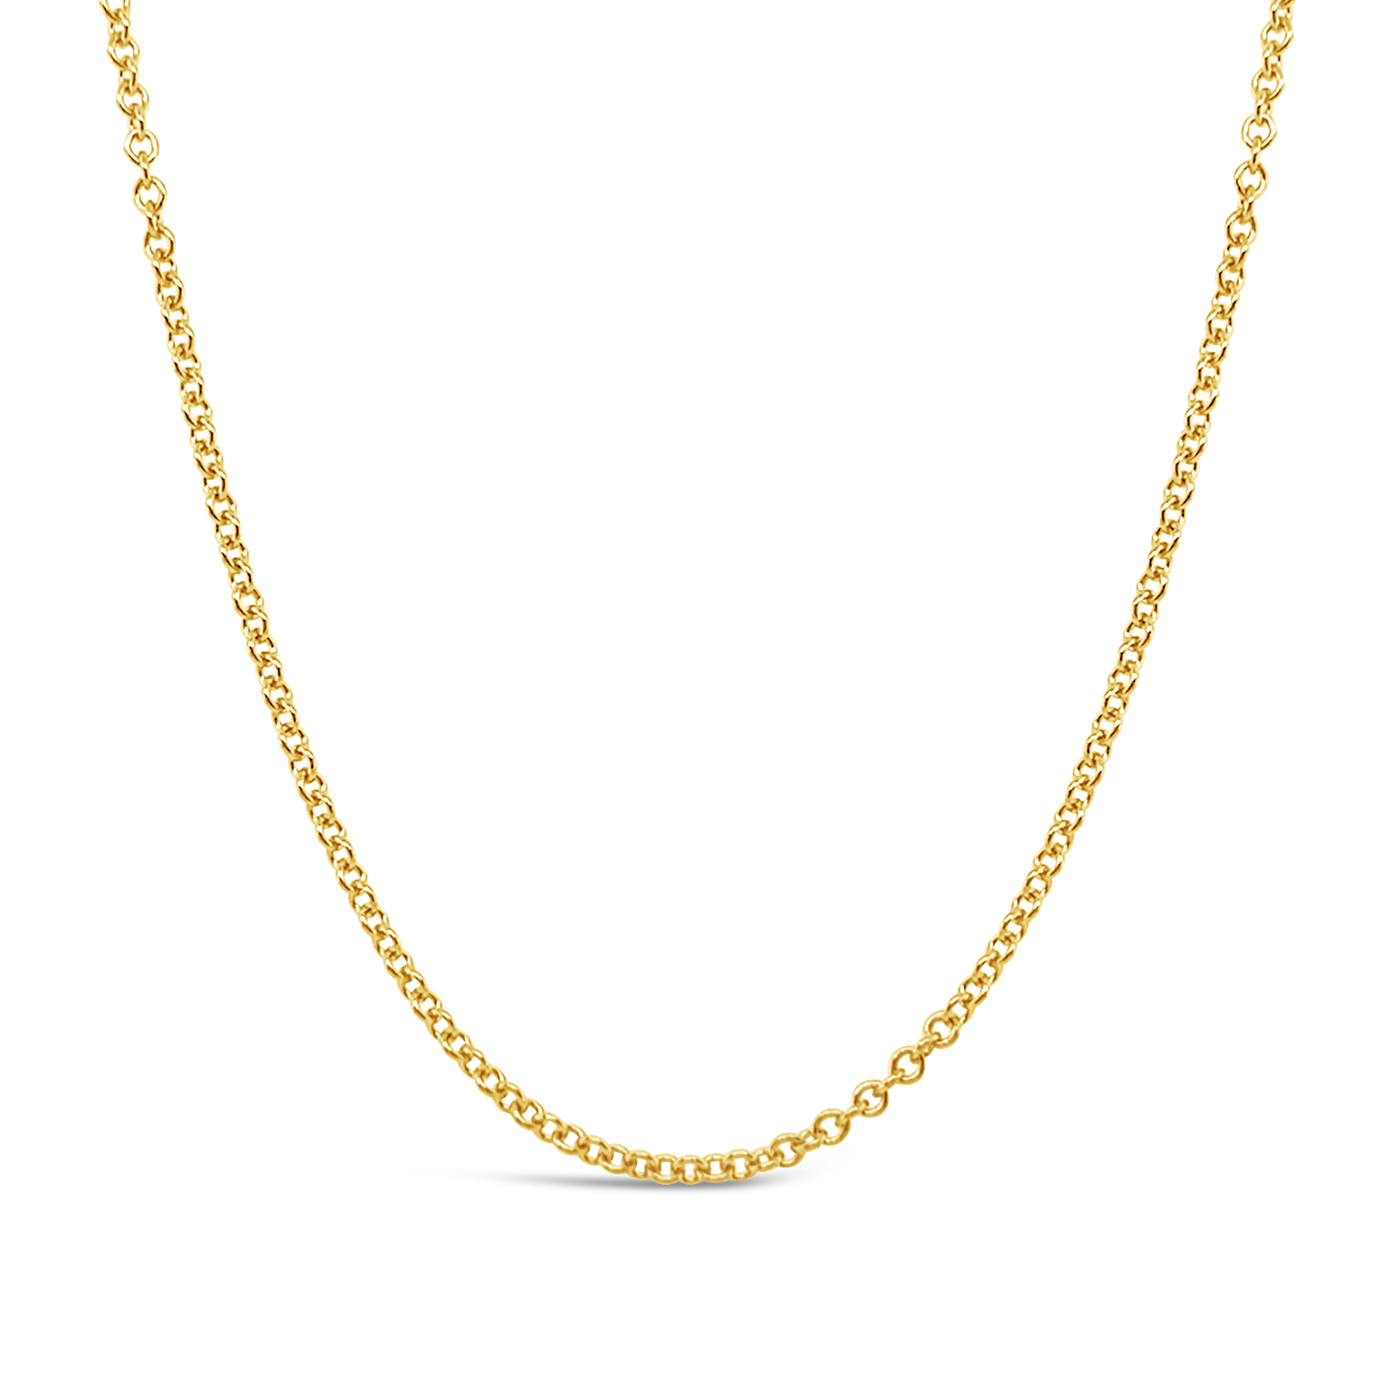 Adjustable Sliding Bead Cable Chain (22")